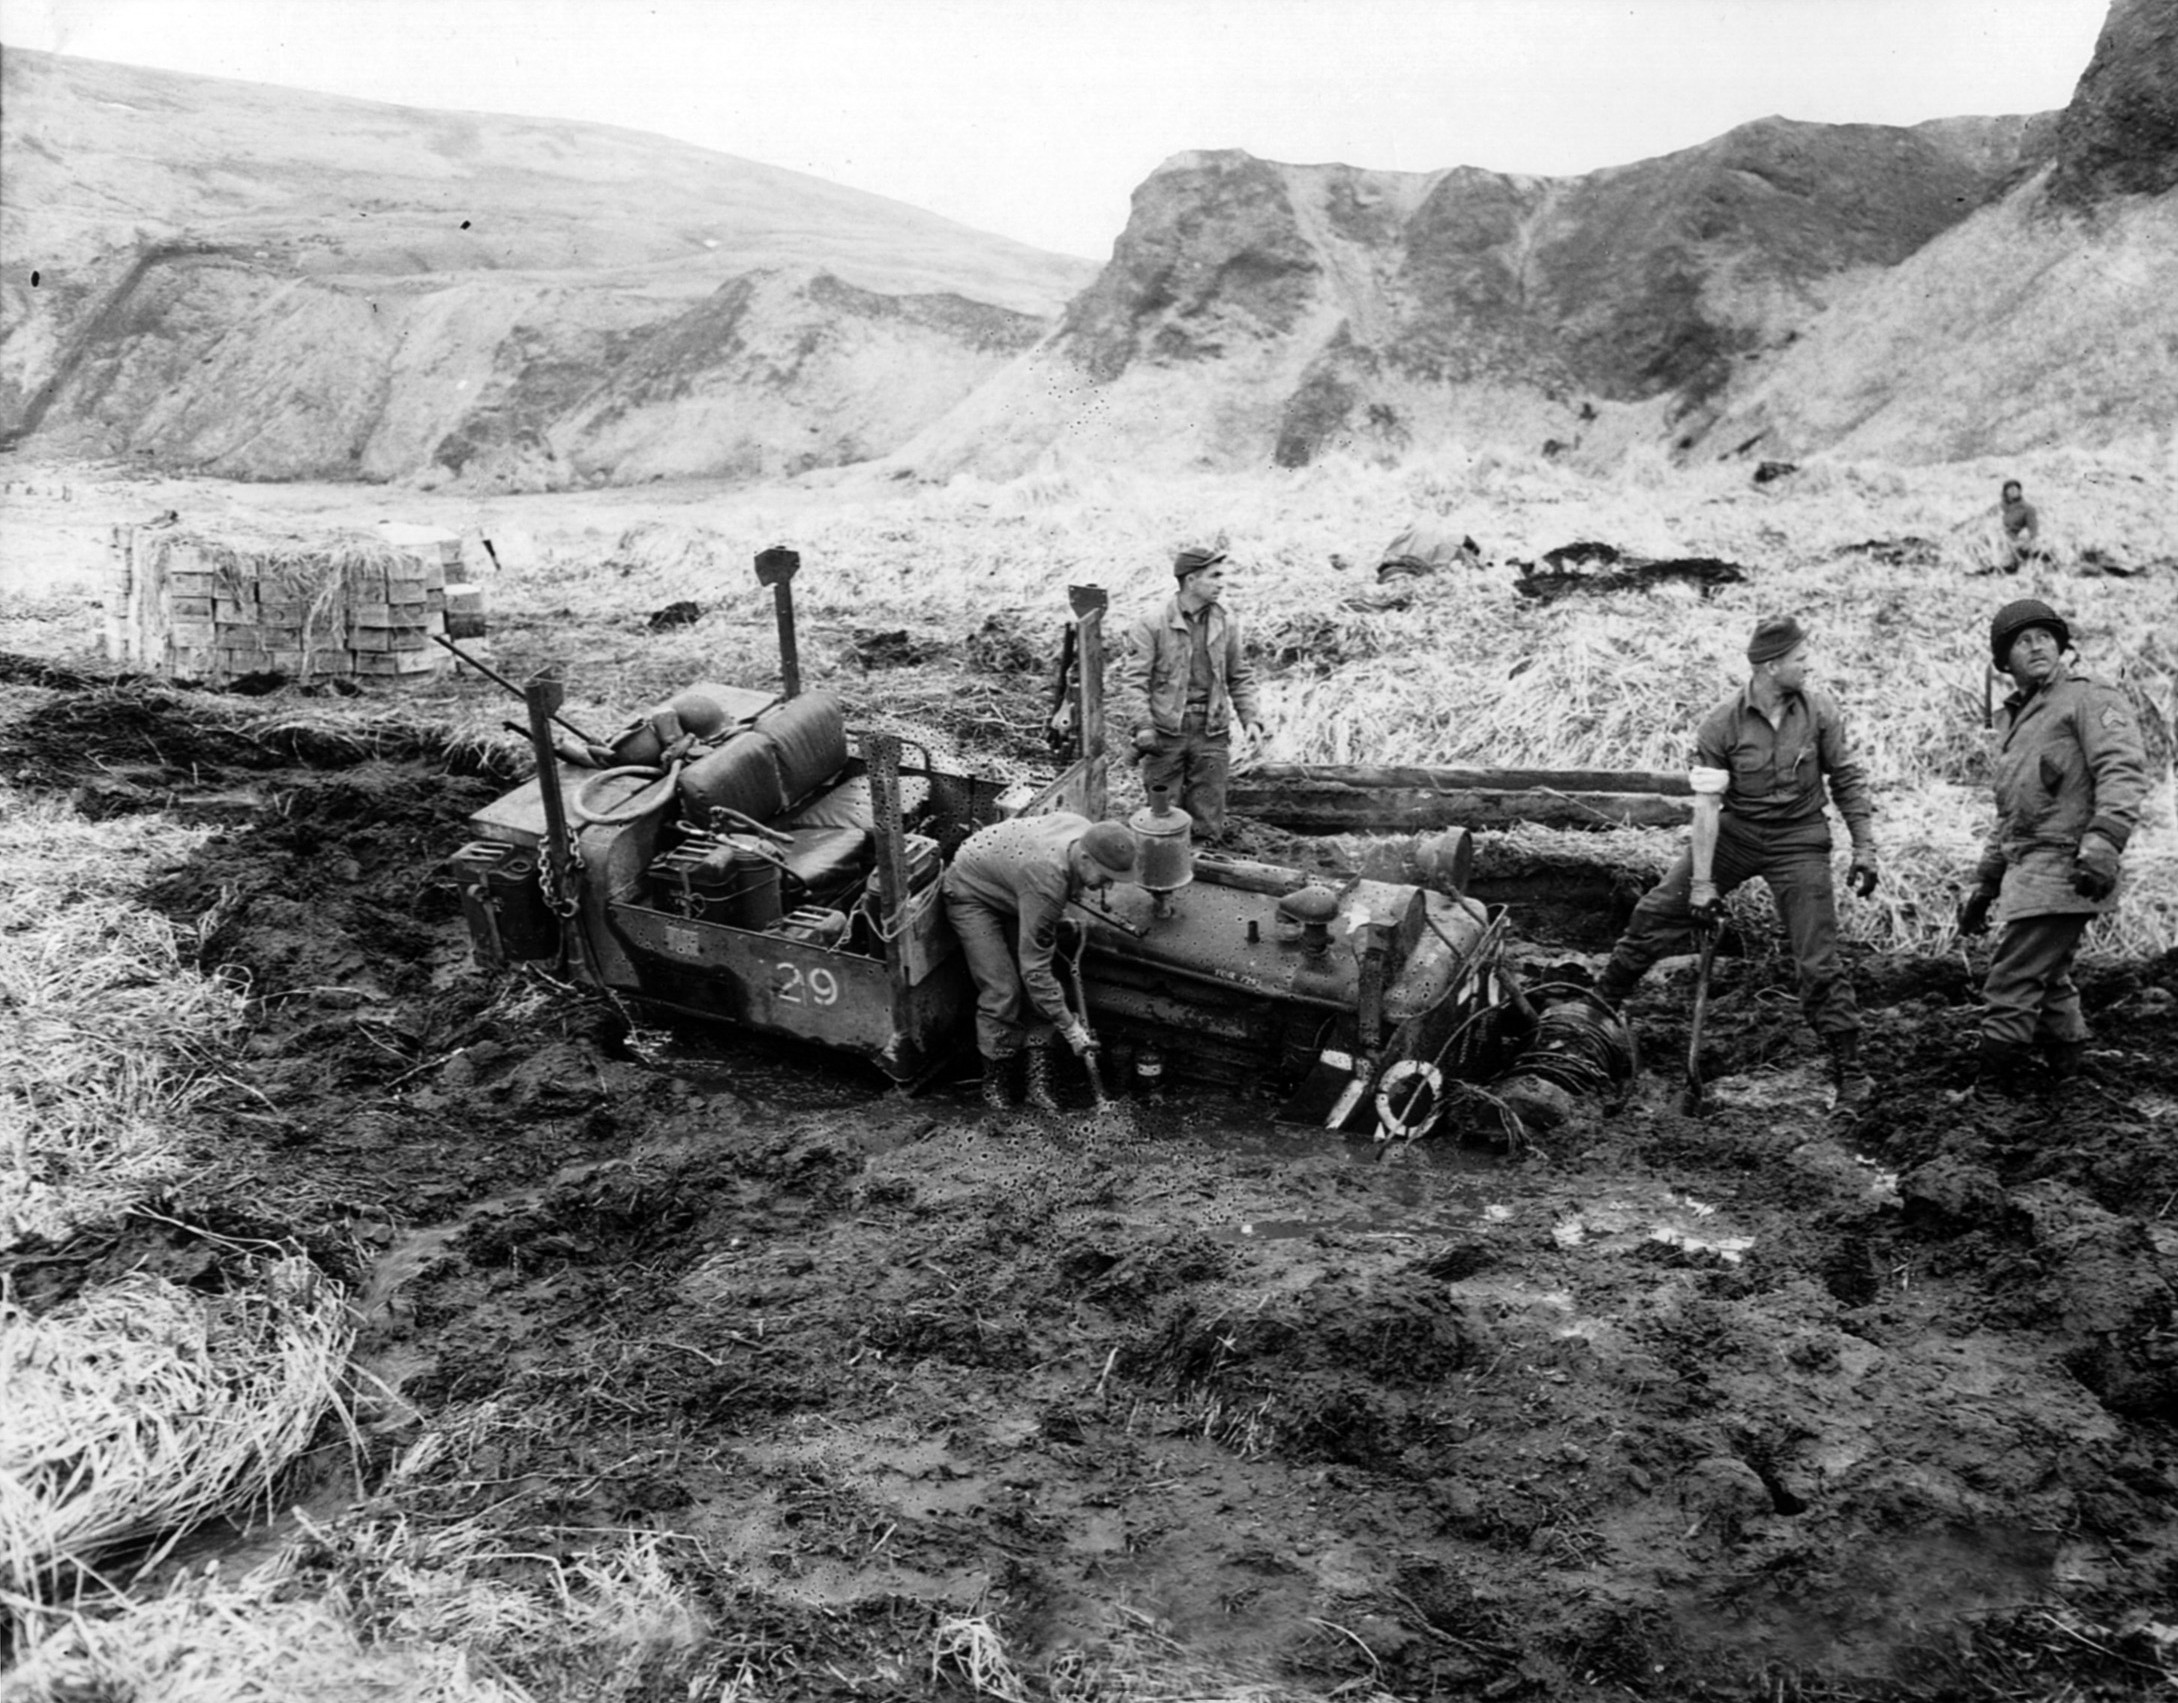 Bogged down on a muddy trail in the Aleutians, a tractor meant to move earth has become its prisoner. The sound of approaching aircraft has grabbed the attention of the soldiers attempting to reclaim the equipment.